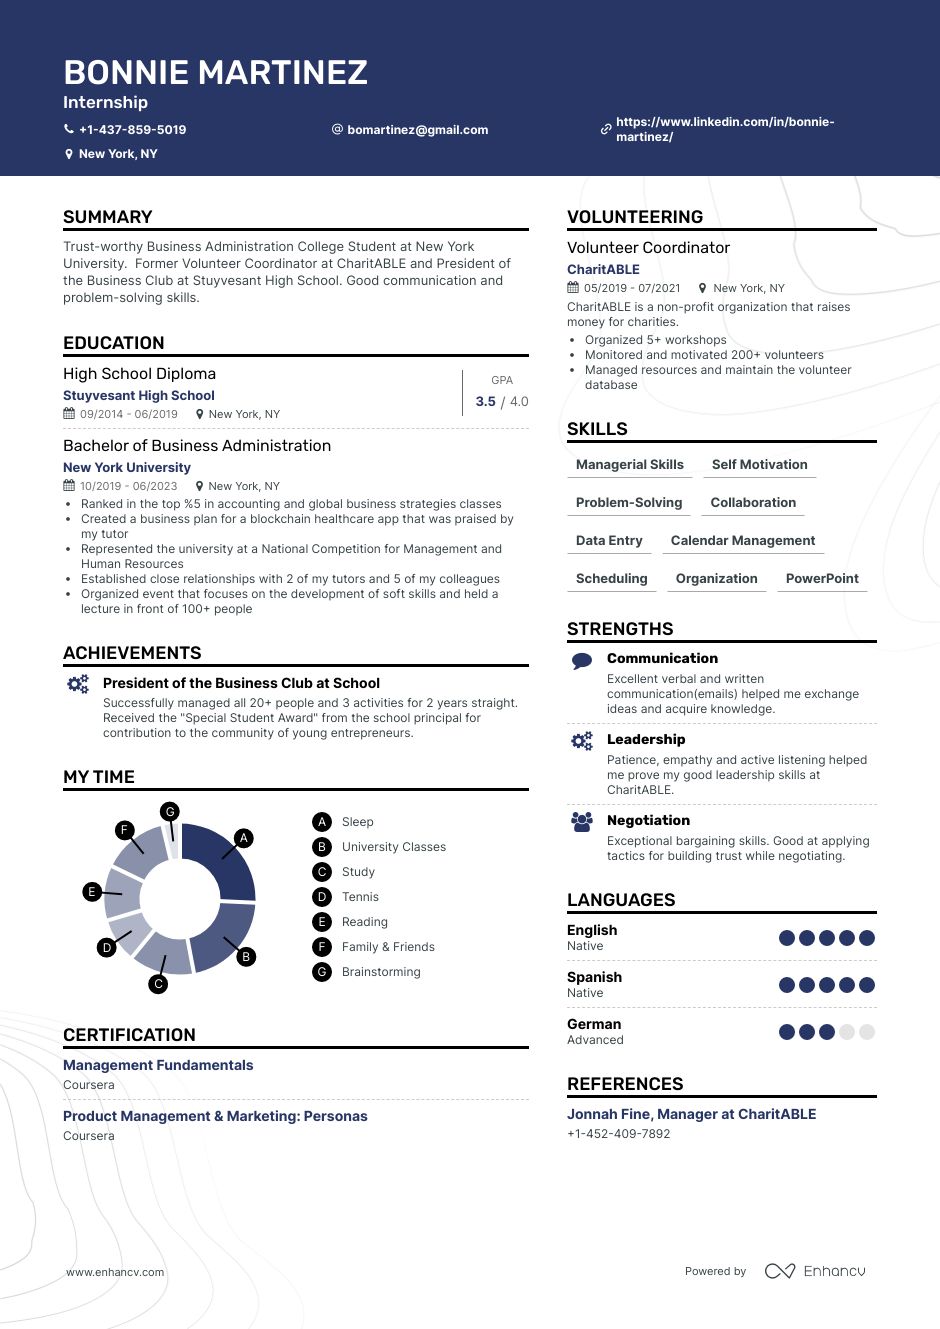 Intern CV template with an accented header and two column outline. Features a creative section to help it stand out